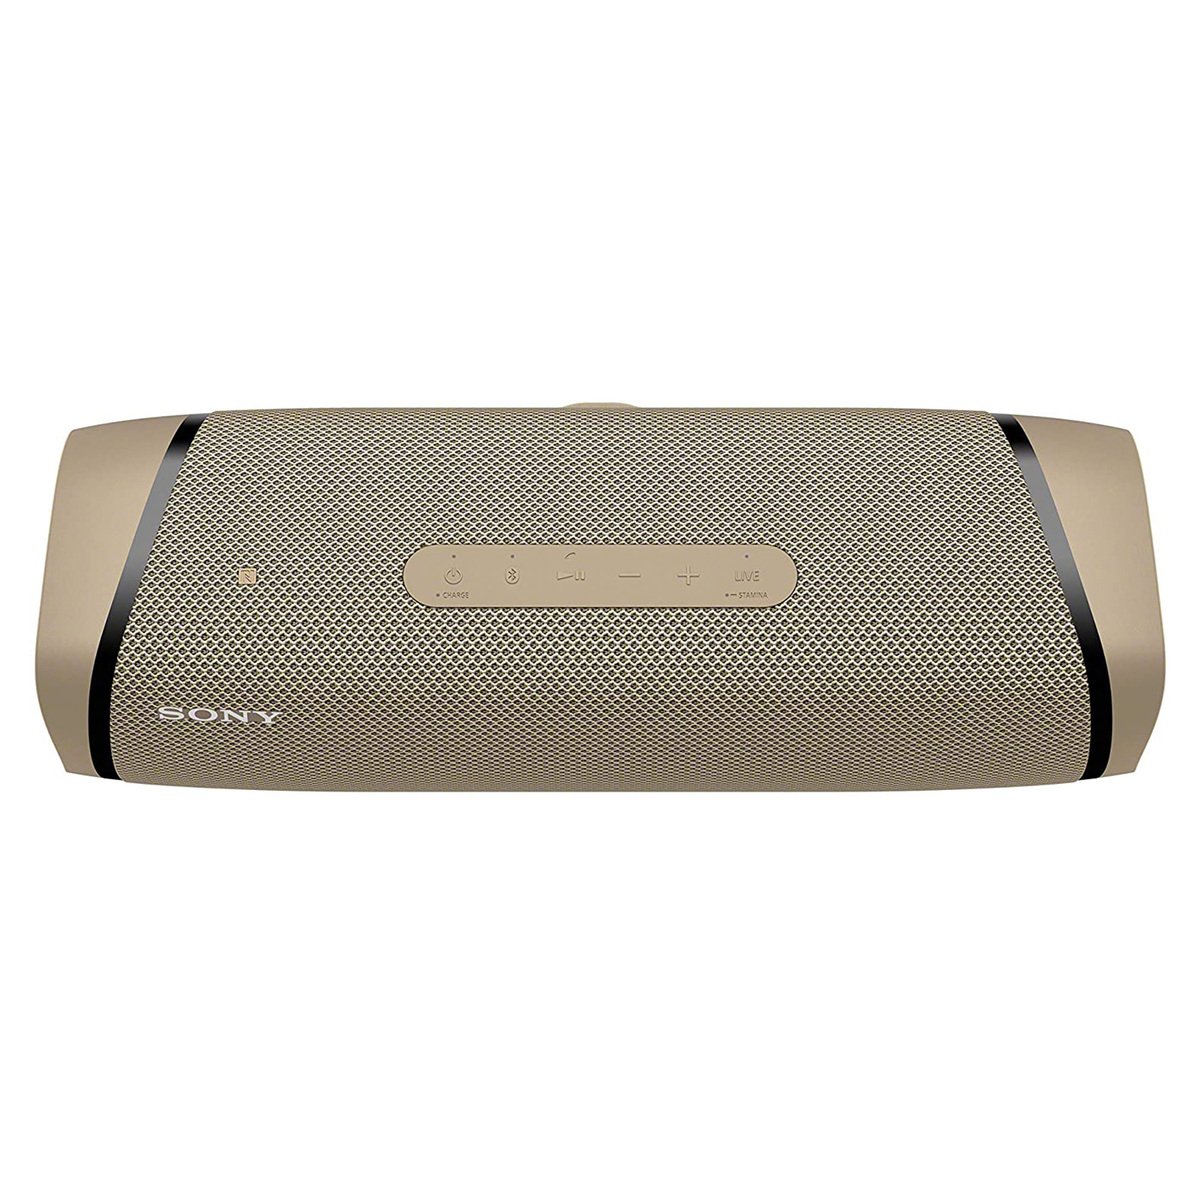 Sony SRS-XB43 EXTRA BASS Wireless Portable Speaker IP67 Waterproof Bluetooth and Built In Mic for Phone Calls, Cream